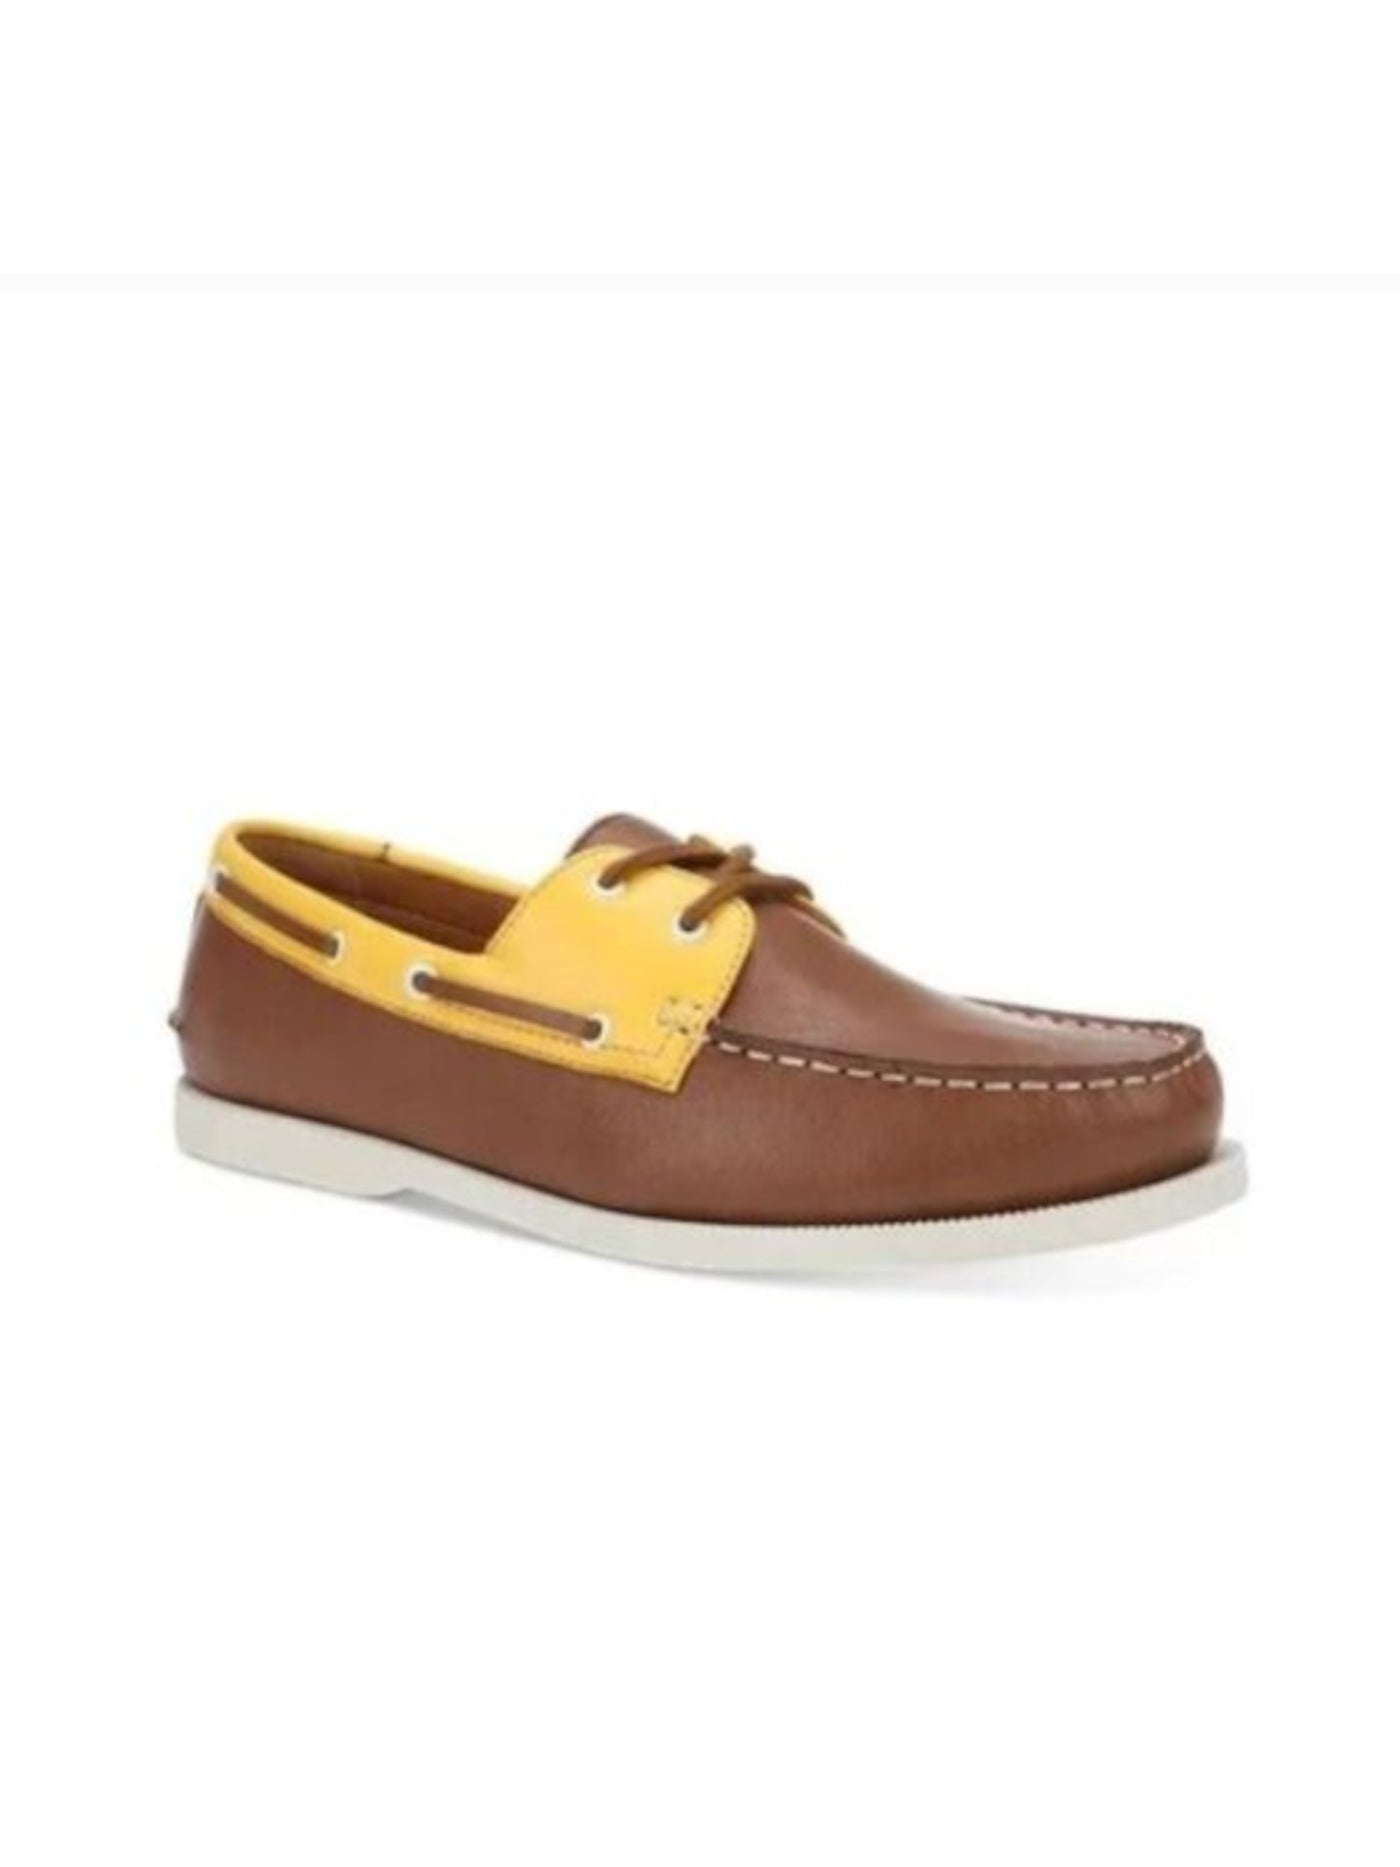 CLUBROOM Mens Brown Color Block Cushioned Comfort Elliot Round Toe Lace-Up Boat Shoes 7.5 M